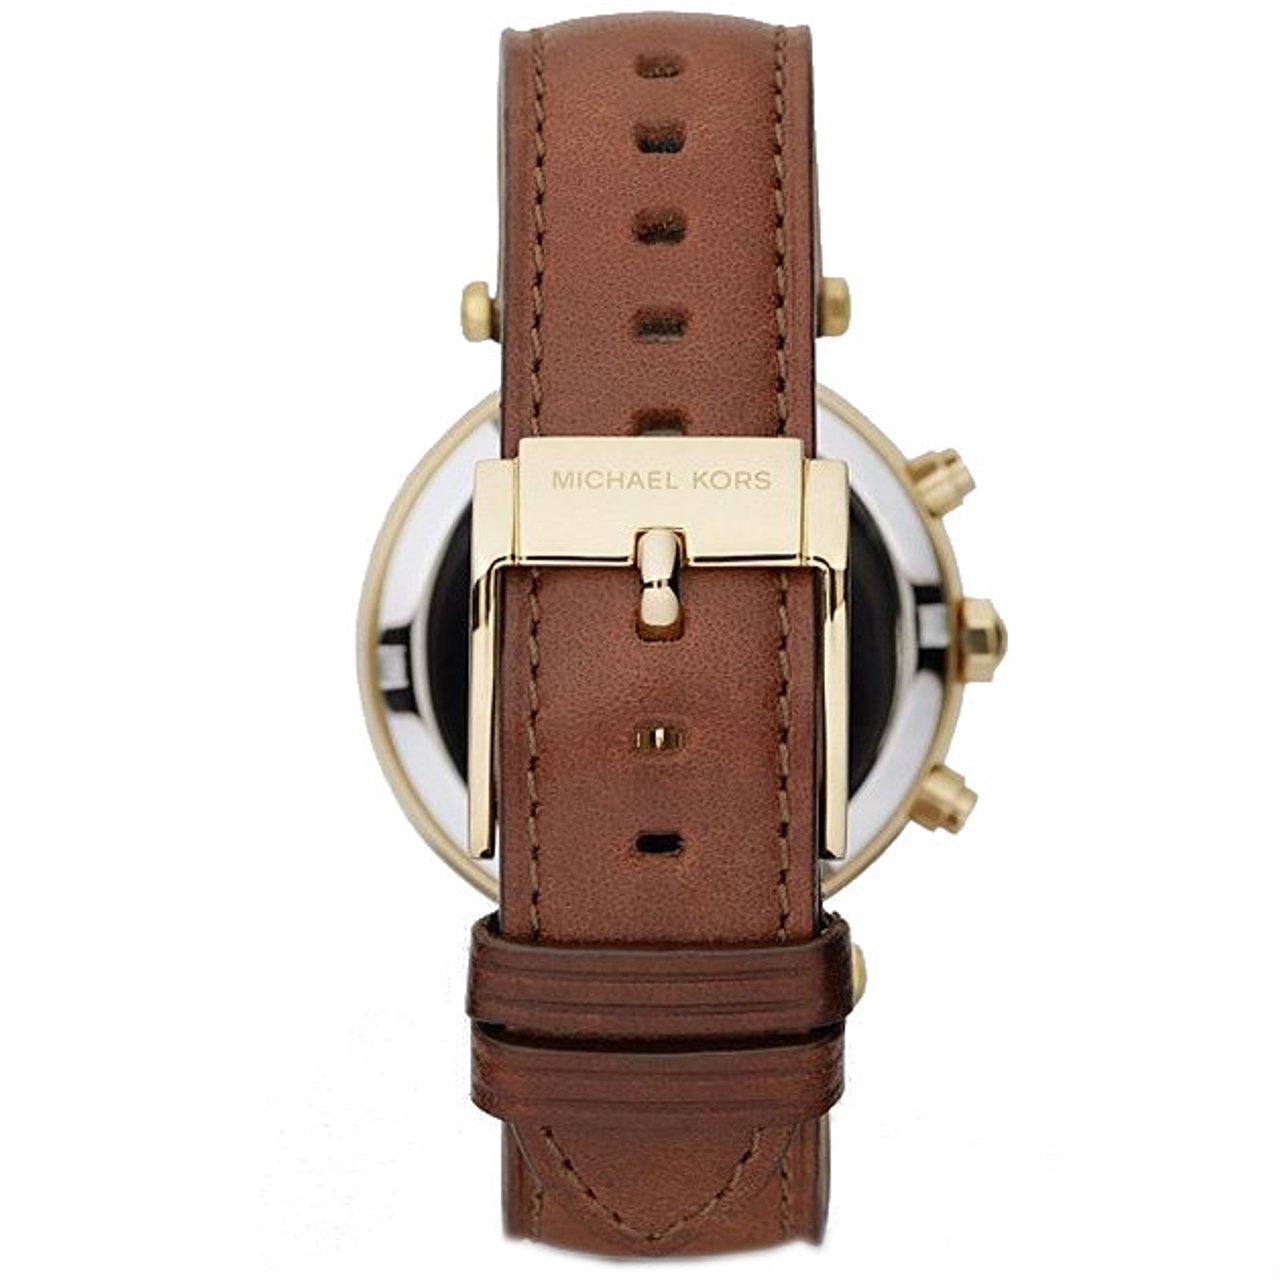 MICHAEL Michael Kors Michael Kors Chronograph Leather Strap Watch 41mm   Nordstrom  Brown leather strap watch Brown leather strap Handbags michael  kors